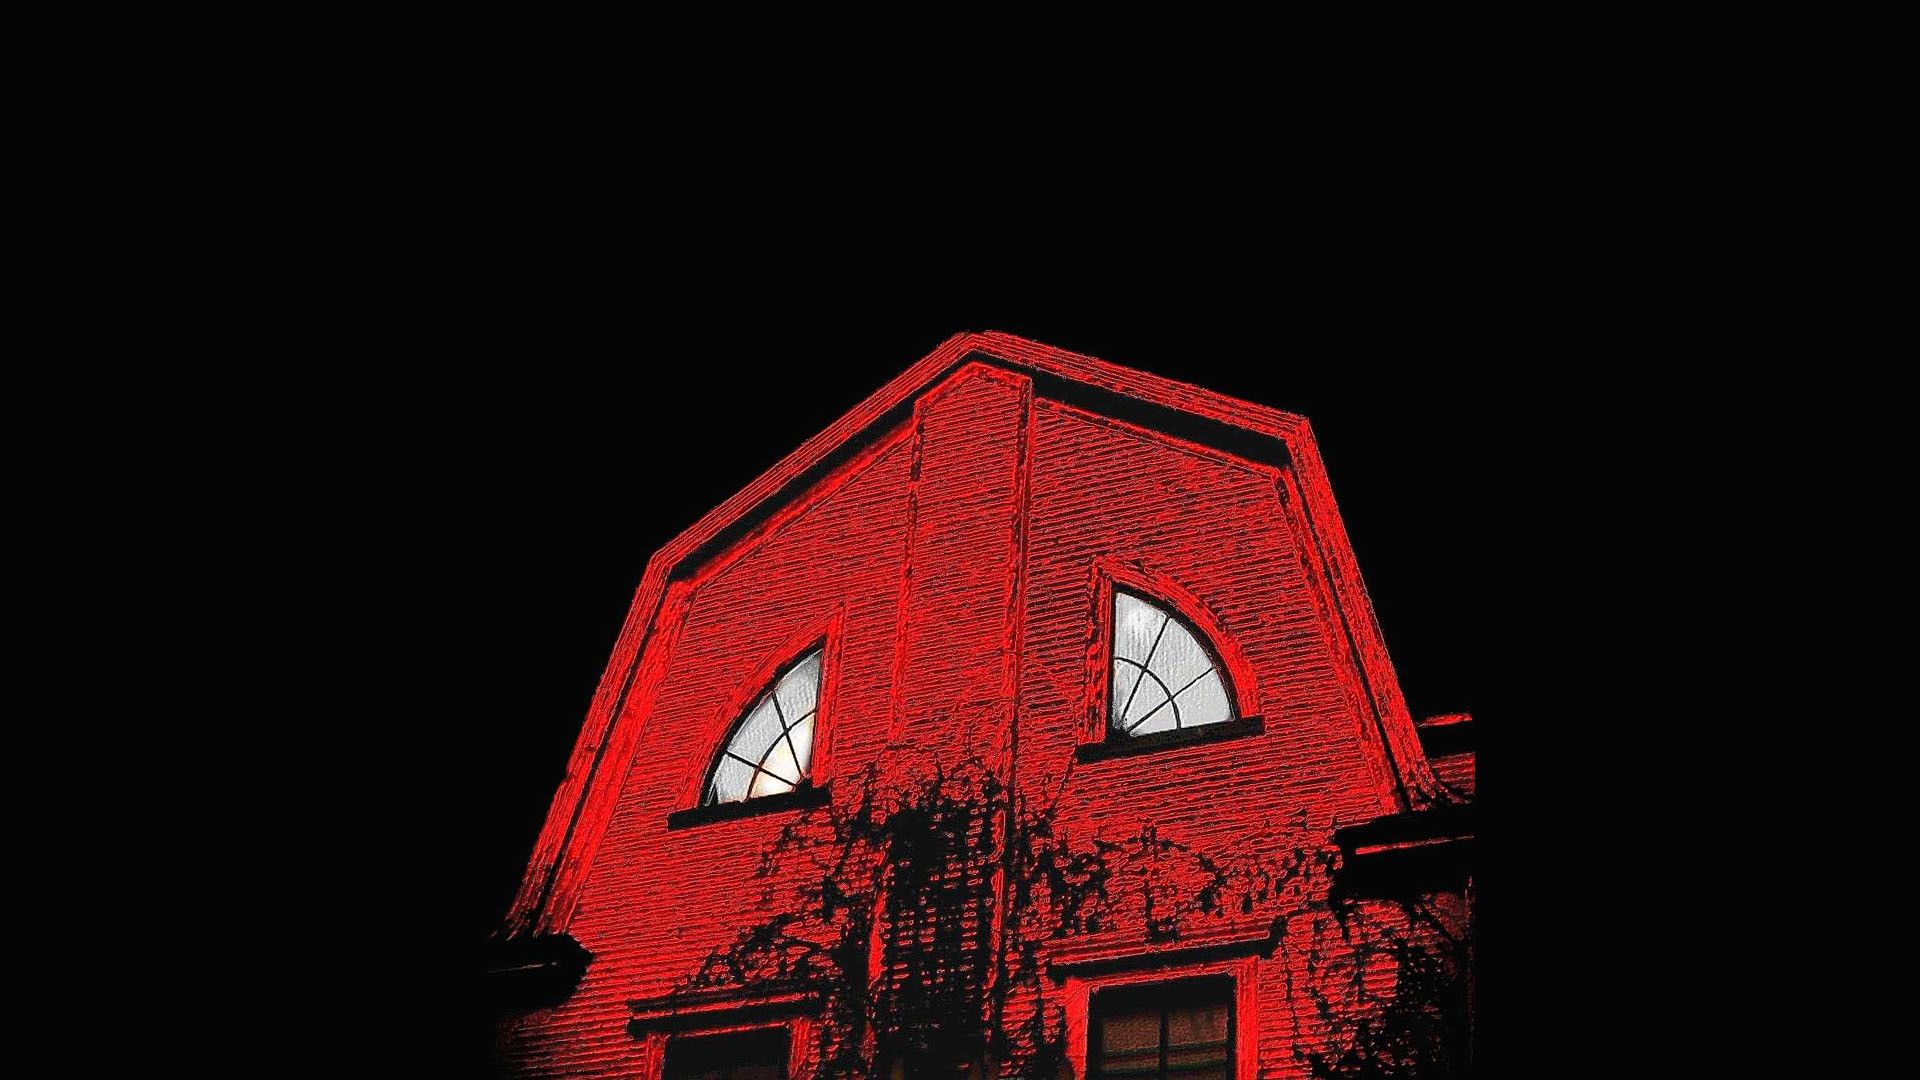 The Amityville Horror background